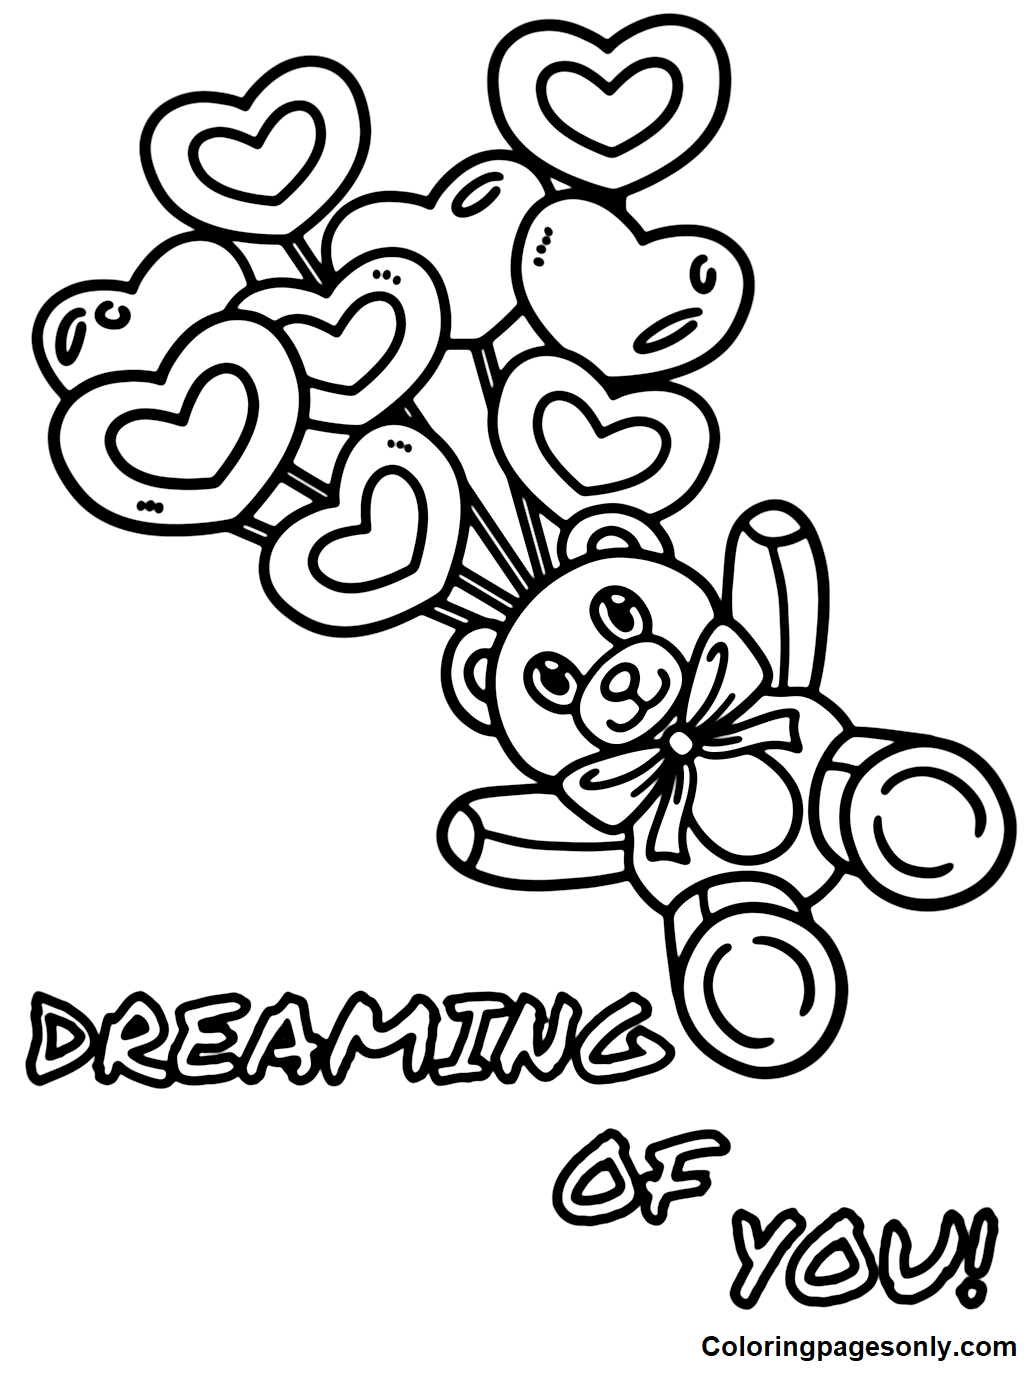 Teddy Bear with Heart Balloons Coloring Page